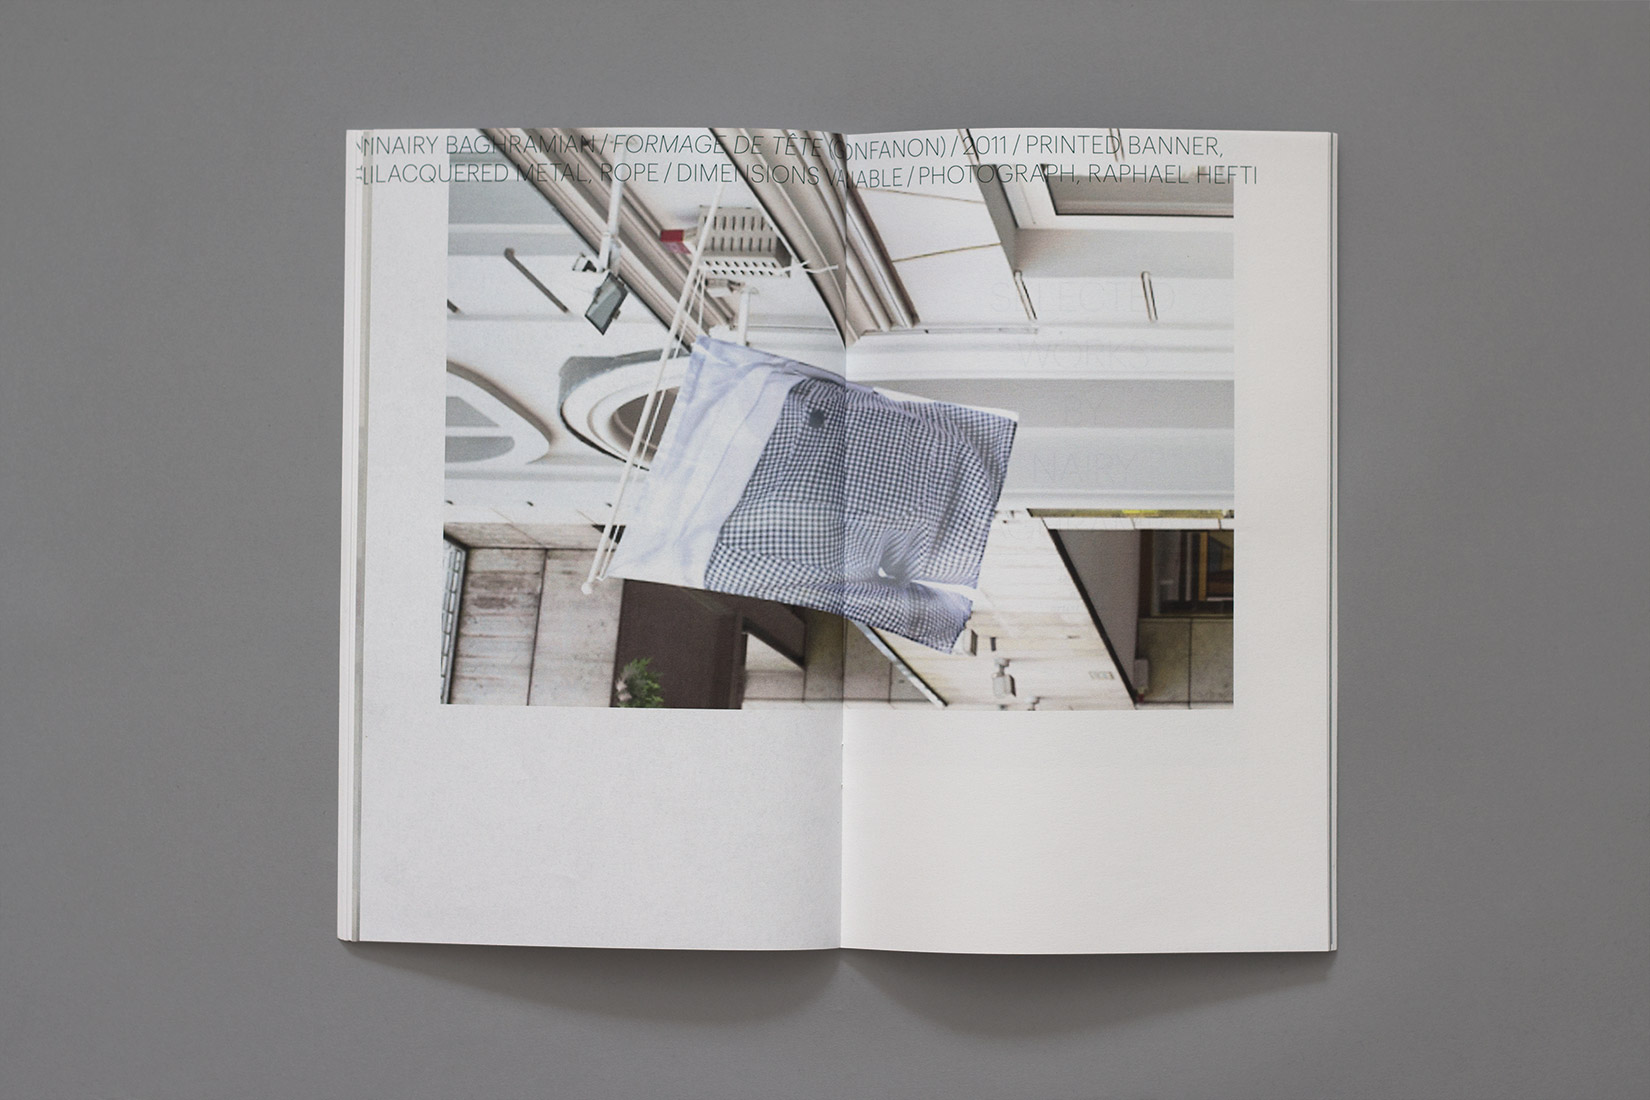 Livre d'artiste, Nairy Baghramian, Selected works by Nairy Baghramian